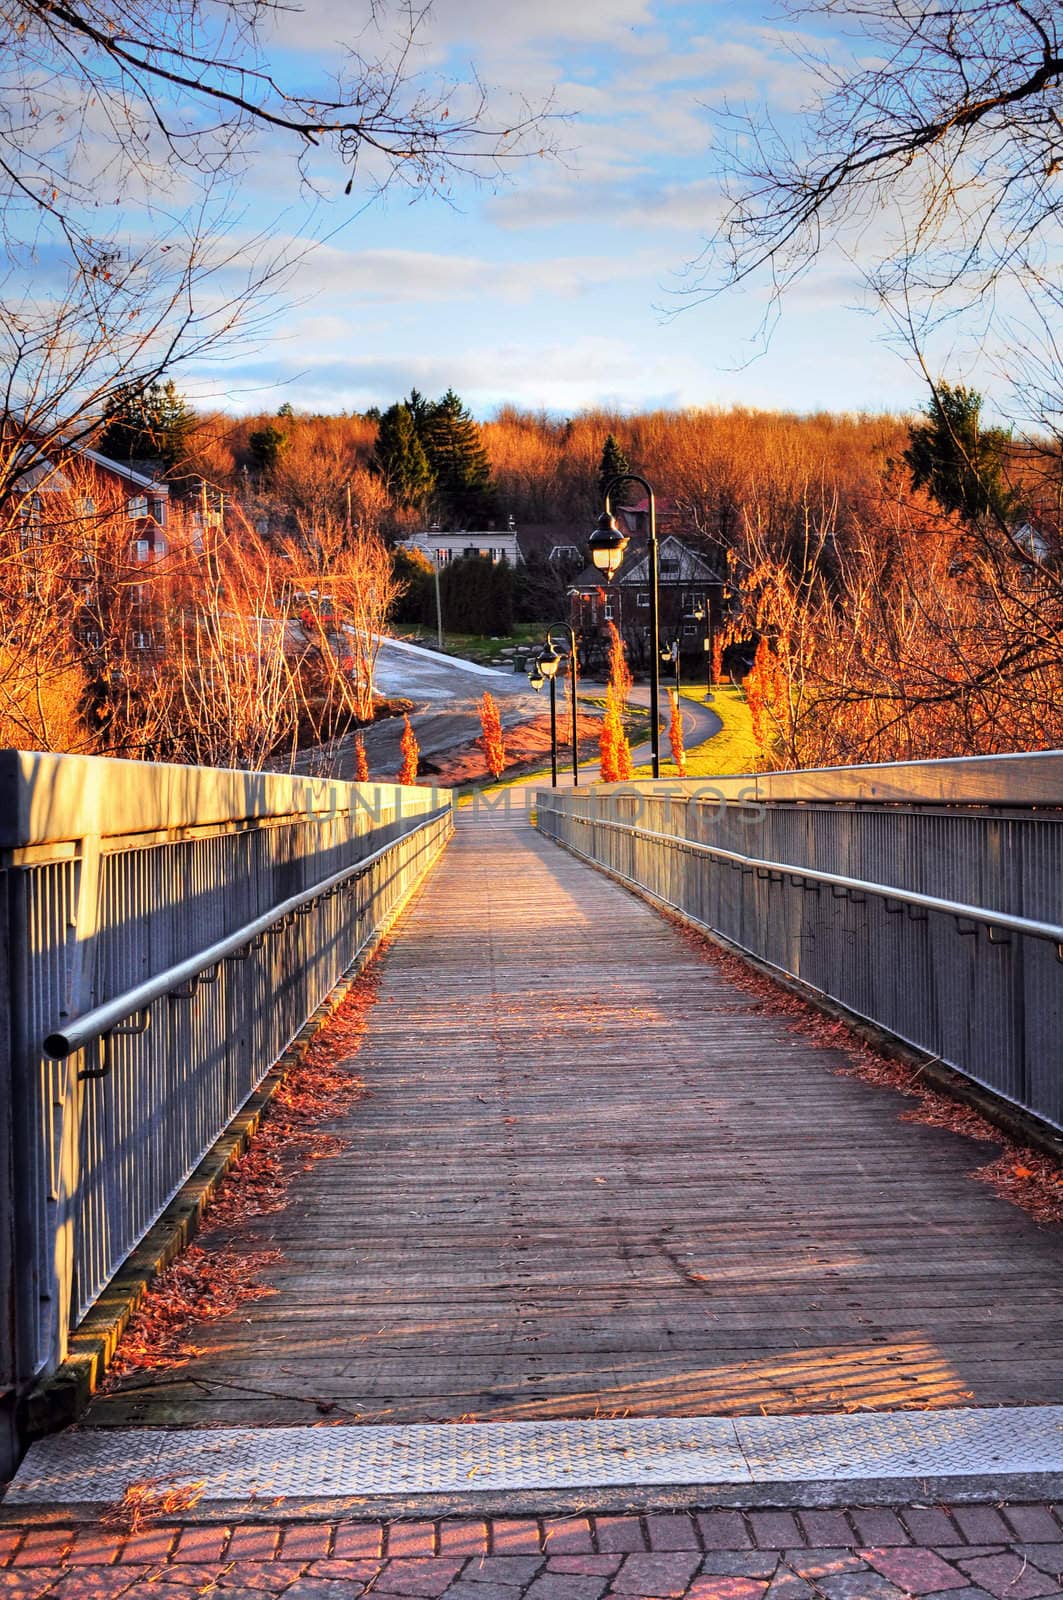 Beautiful nature scene: sun setting over the wooden bridge of a small town on a autumn day.